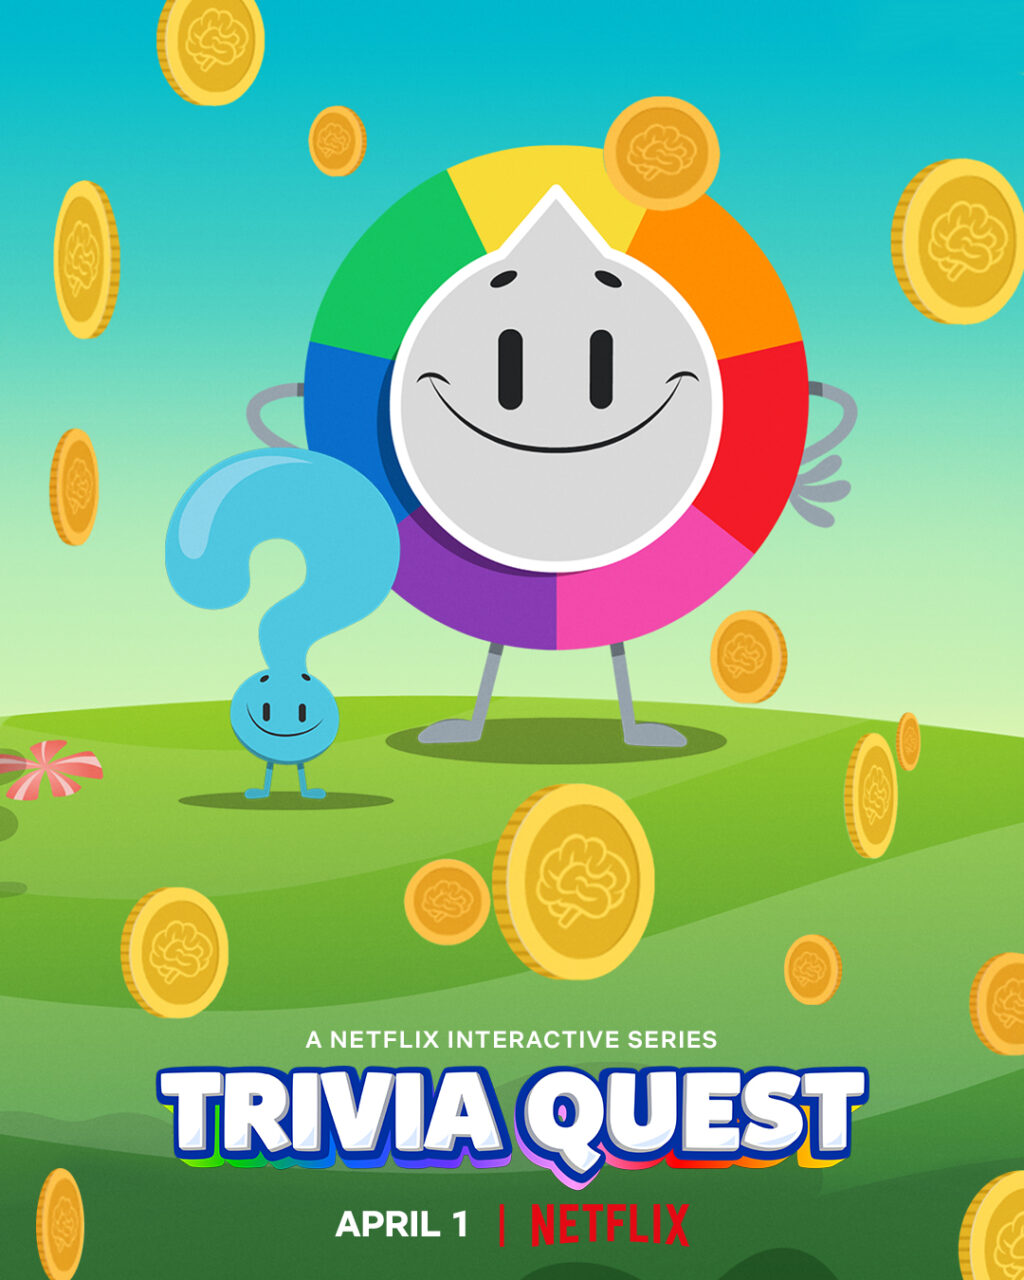 Trivia Crack: A new interactive Netflix series inspired by the popular trivia app